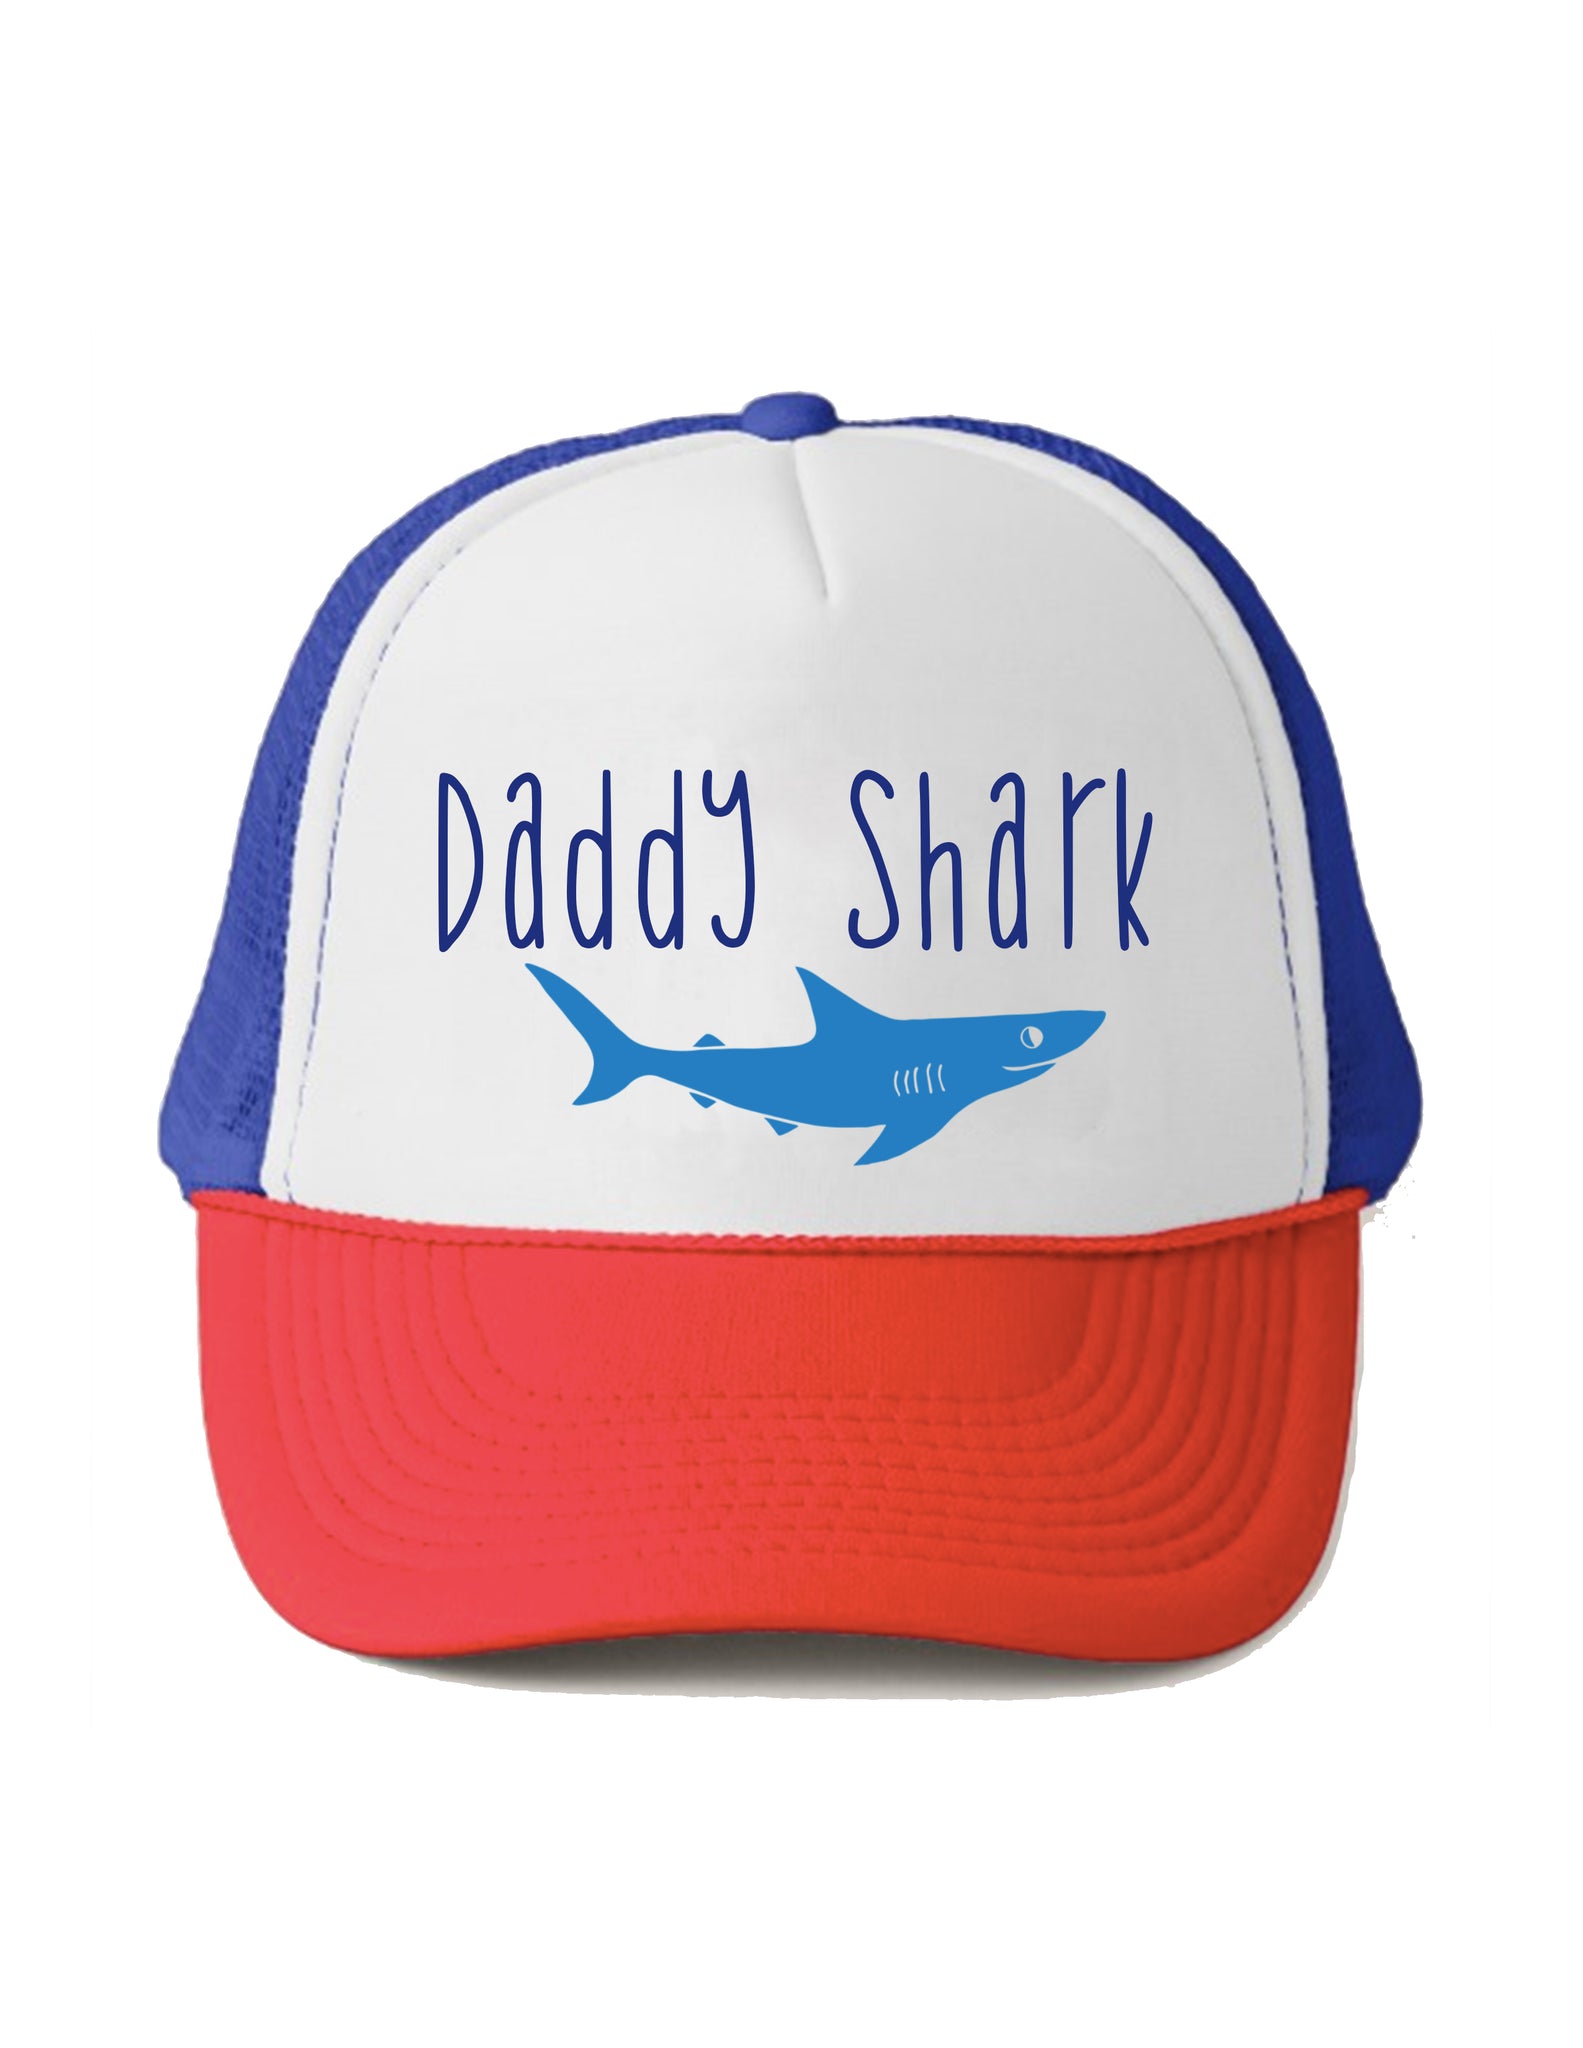 Daddy Shark Trucker Hat Beau and Belle Littles Red White and Blue